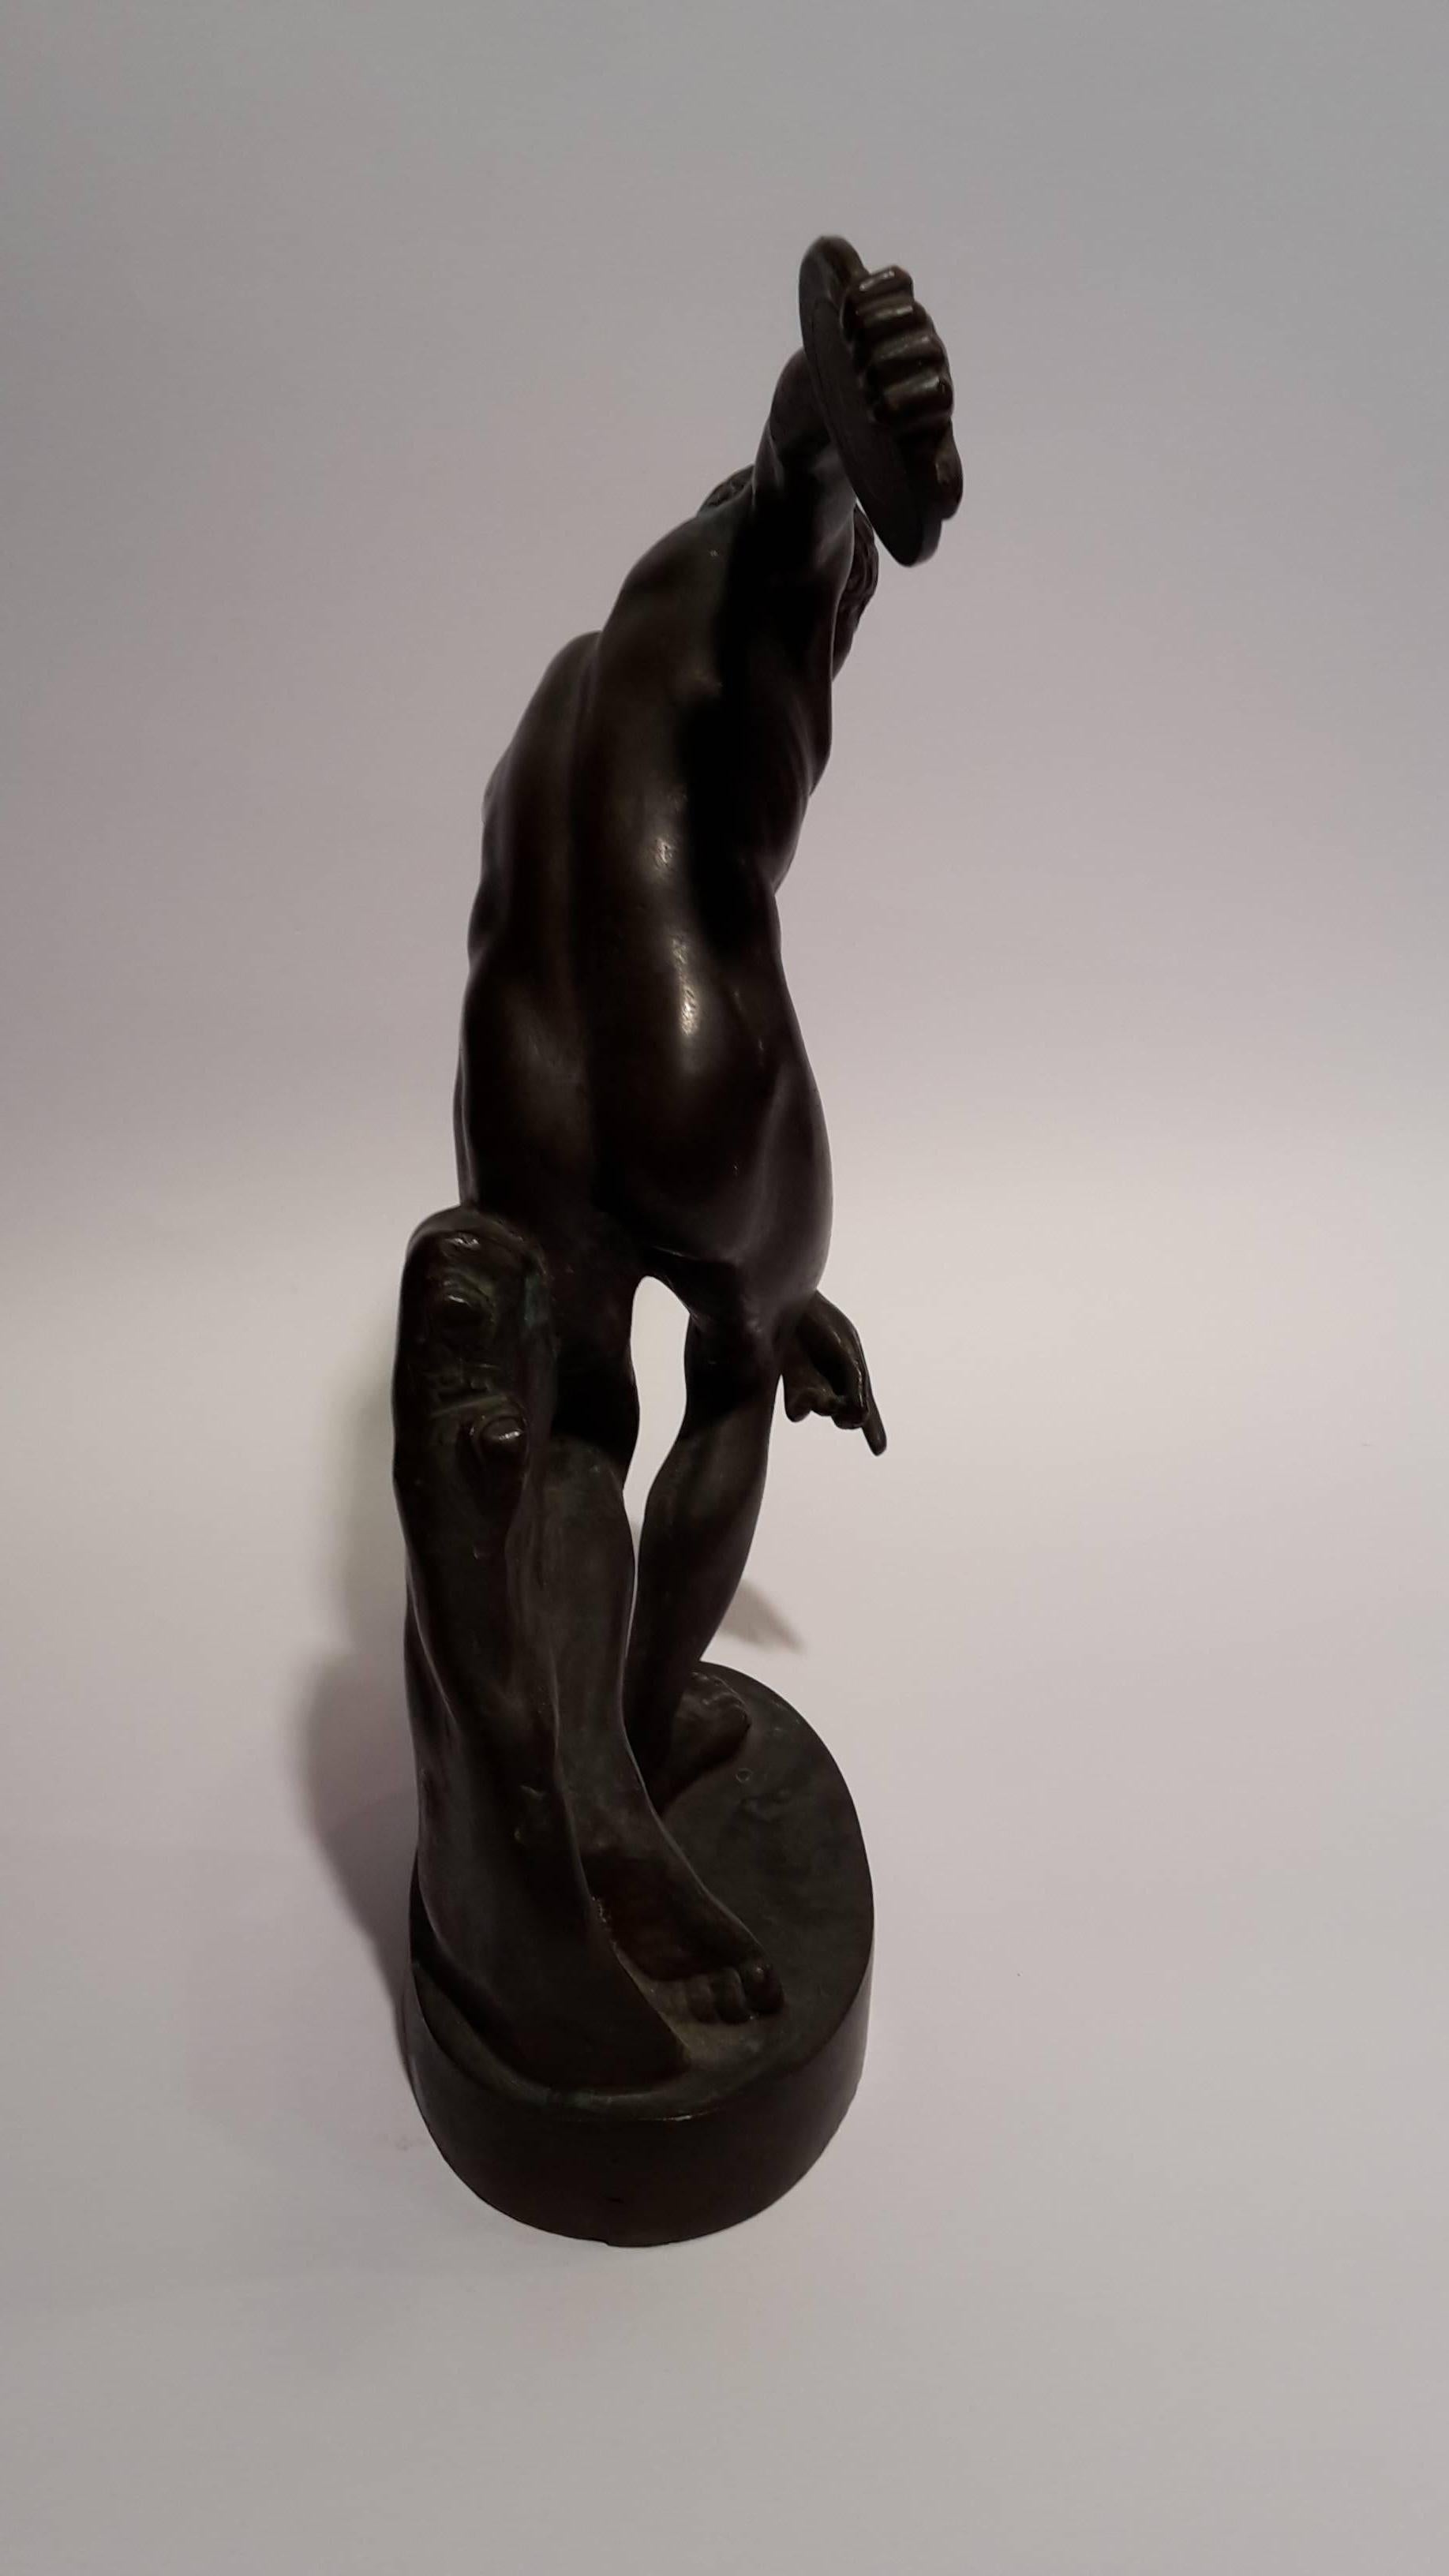 Bronze statue of the Discobolus.
The Discobolus is a sculpture built around 455 BC (period between pre classic and classic) by Myron.
The statue depcting this famous athlete, is inspired by the original Discobolus, recognized as example maximum